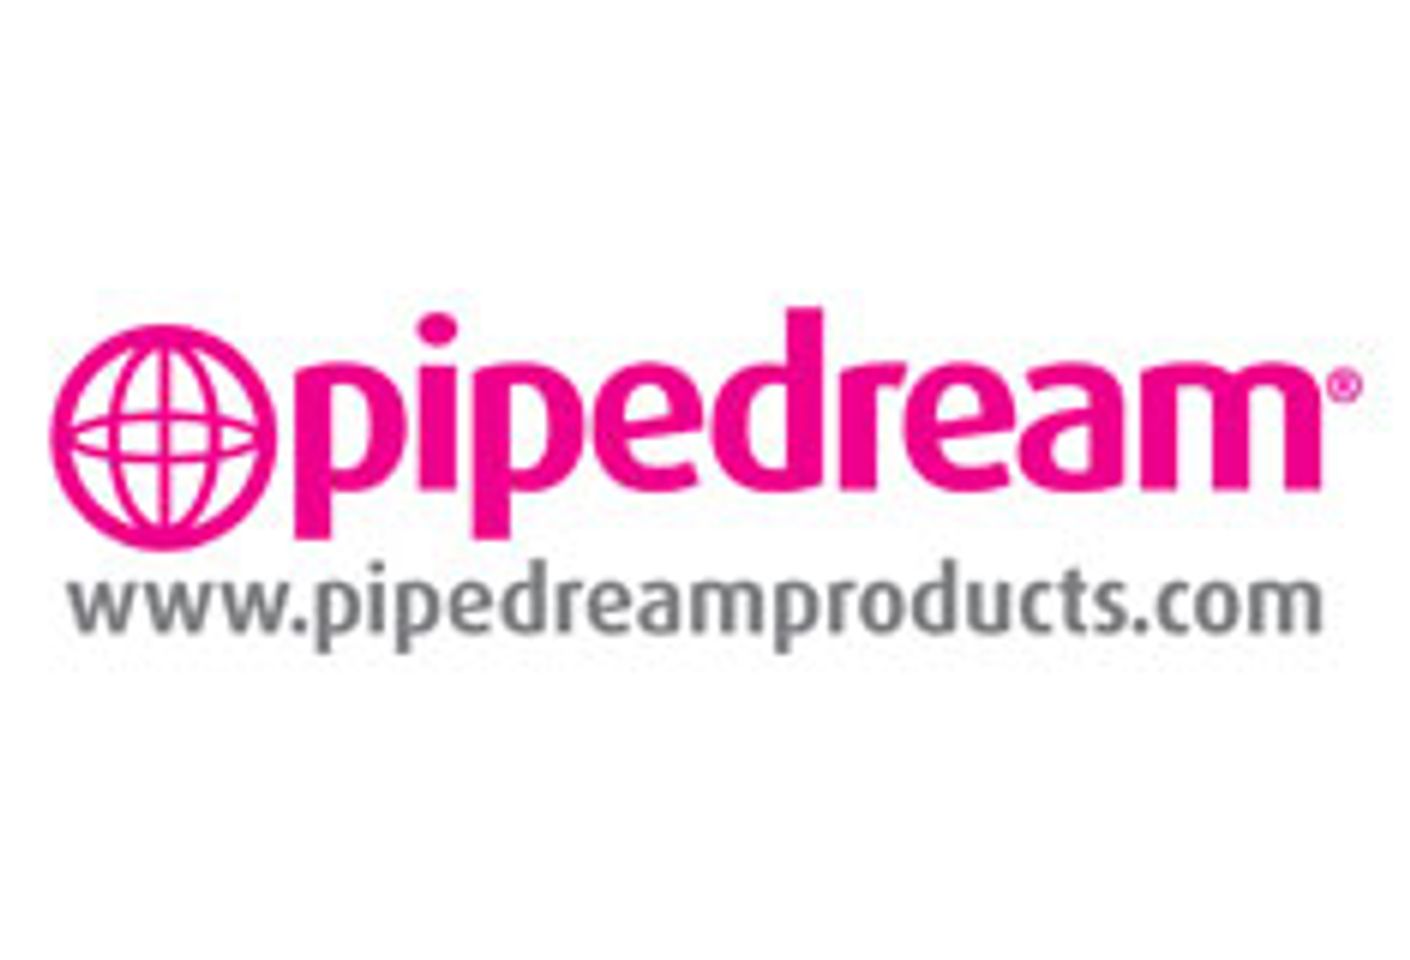 Pipedream Products’ Party Continues with AVN Awards Nominations